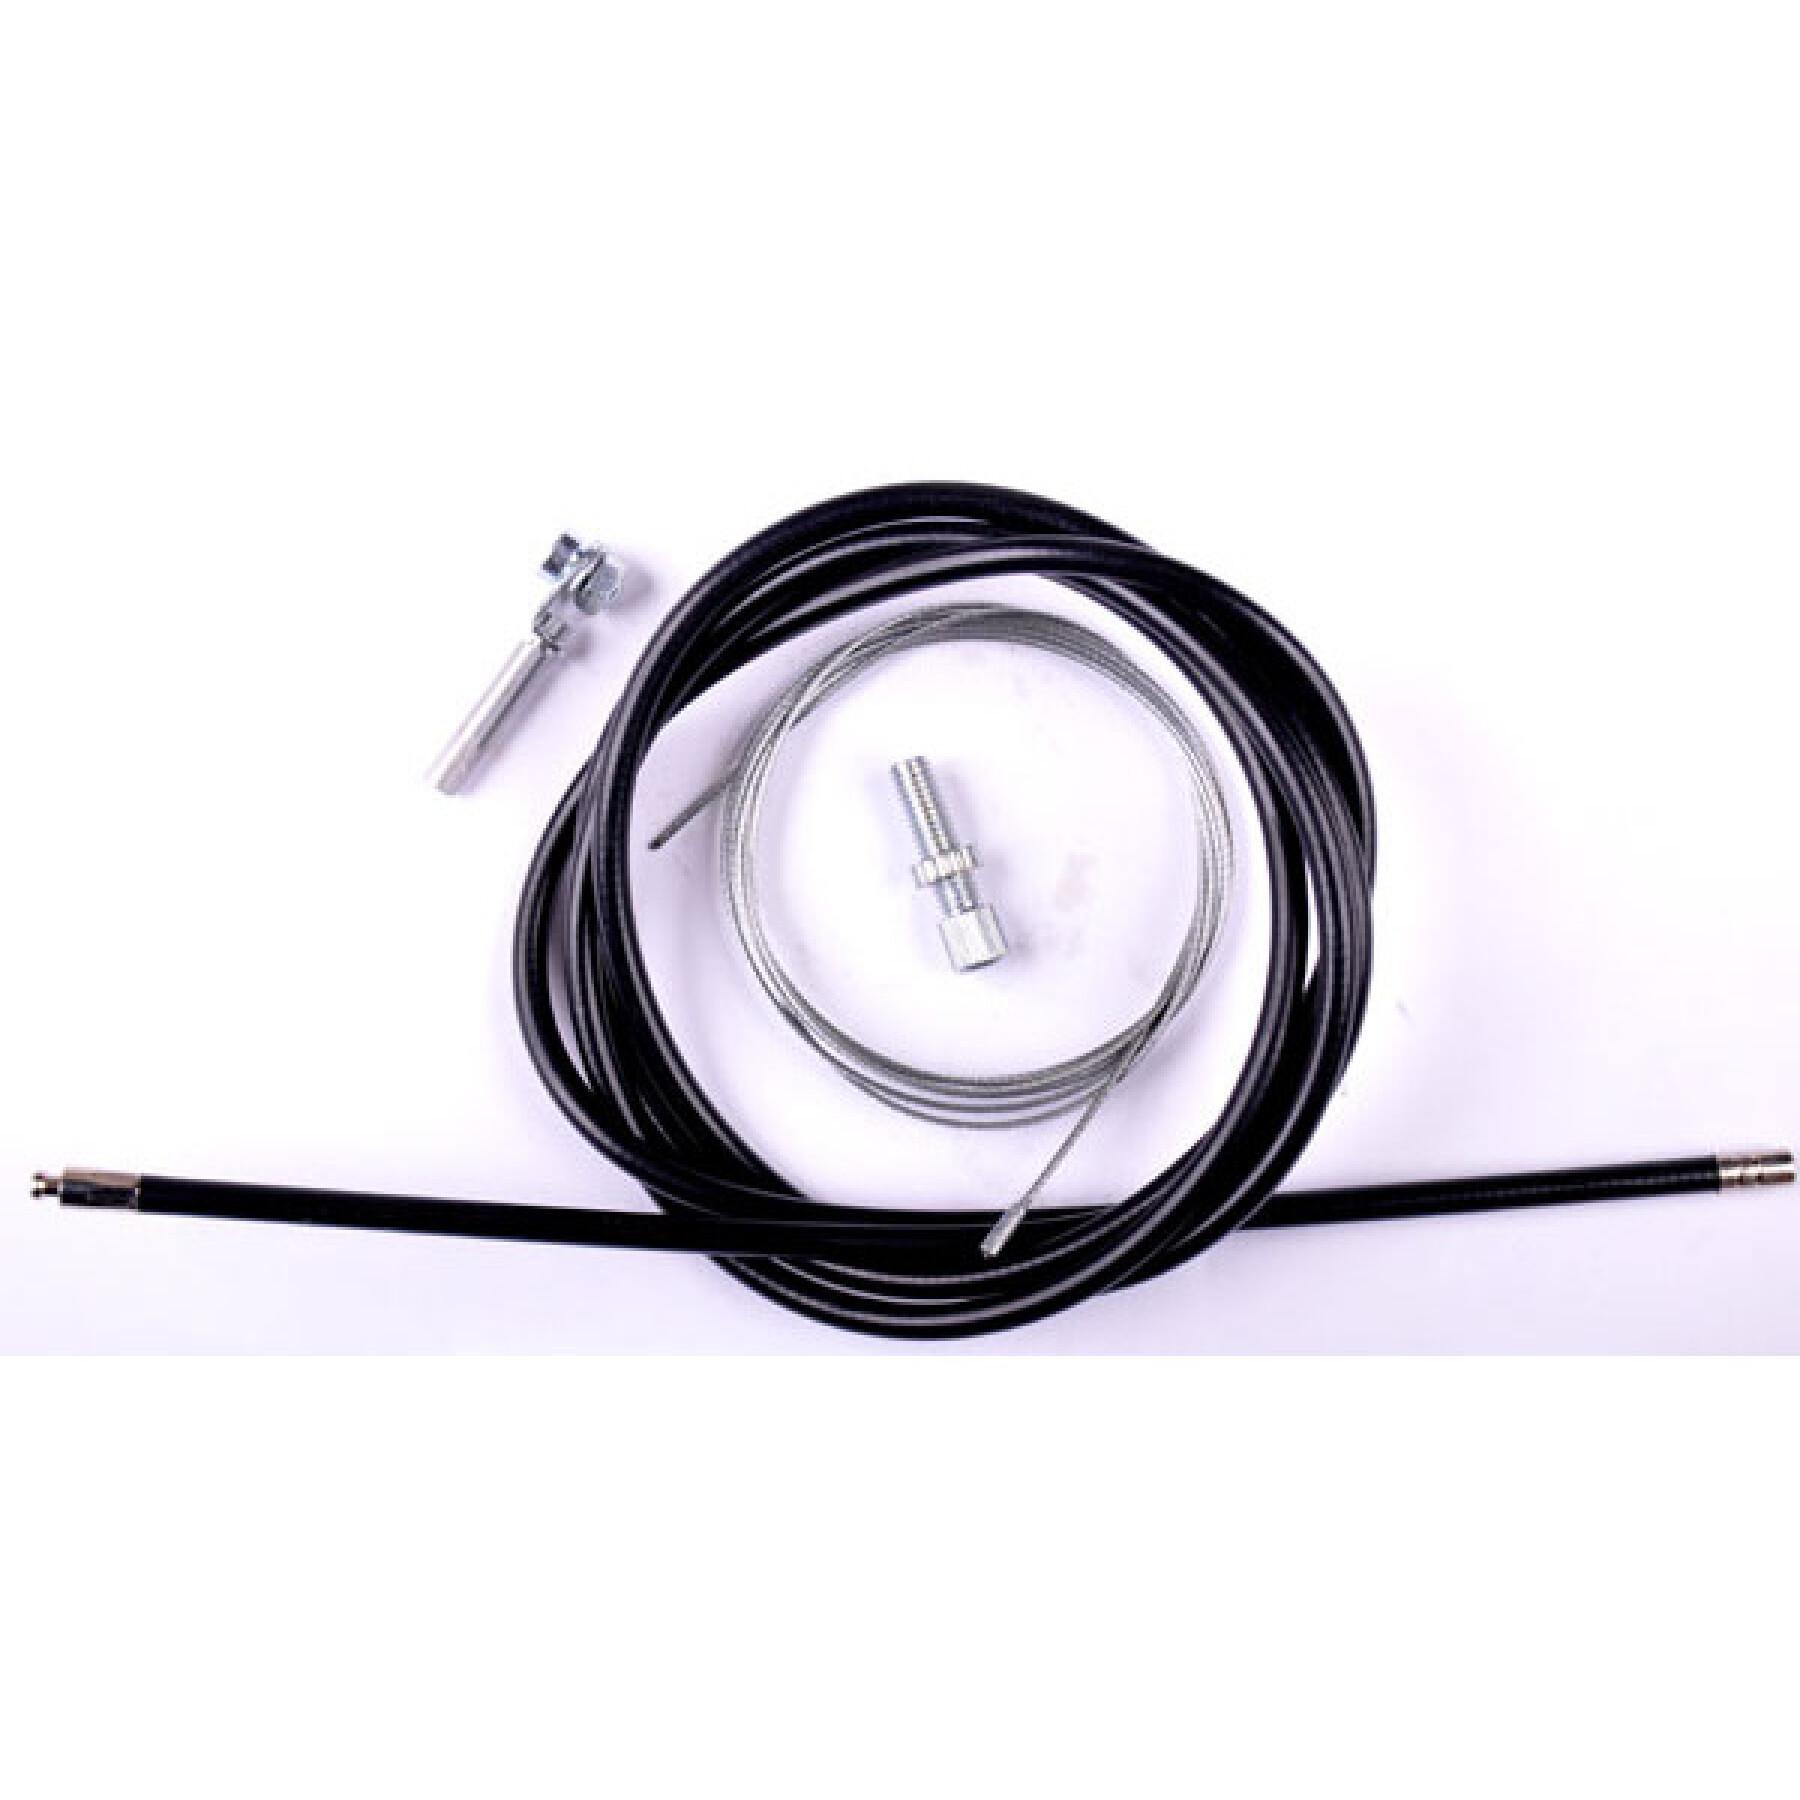 Transmission cable and sheath, accessory for speed controller Sunrace City Sturmey Archer 3V. Classic